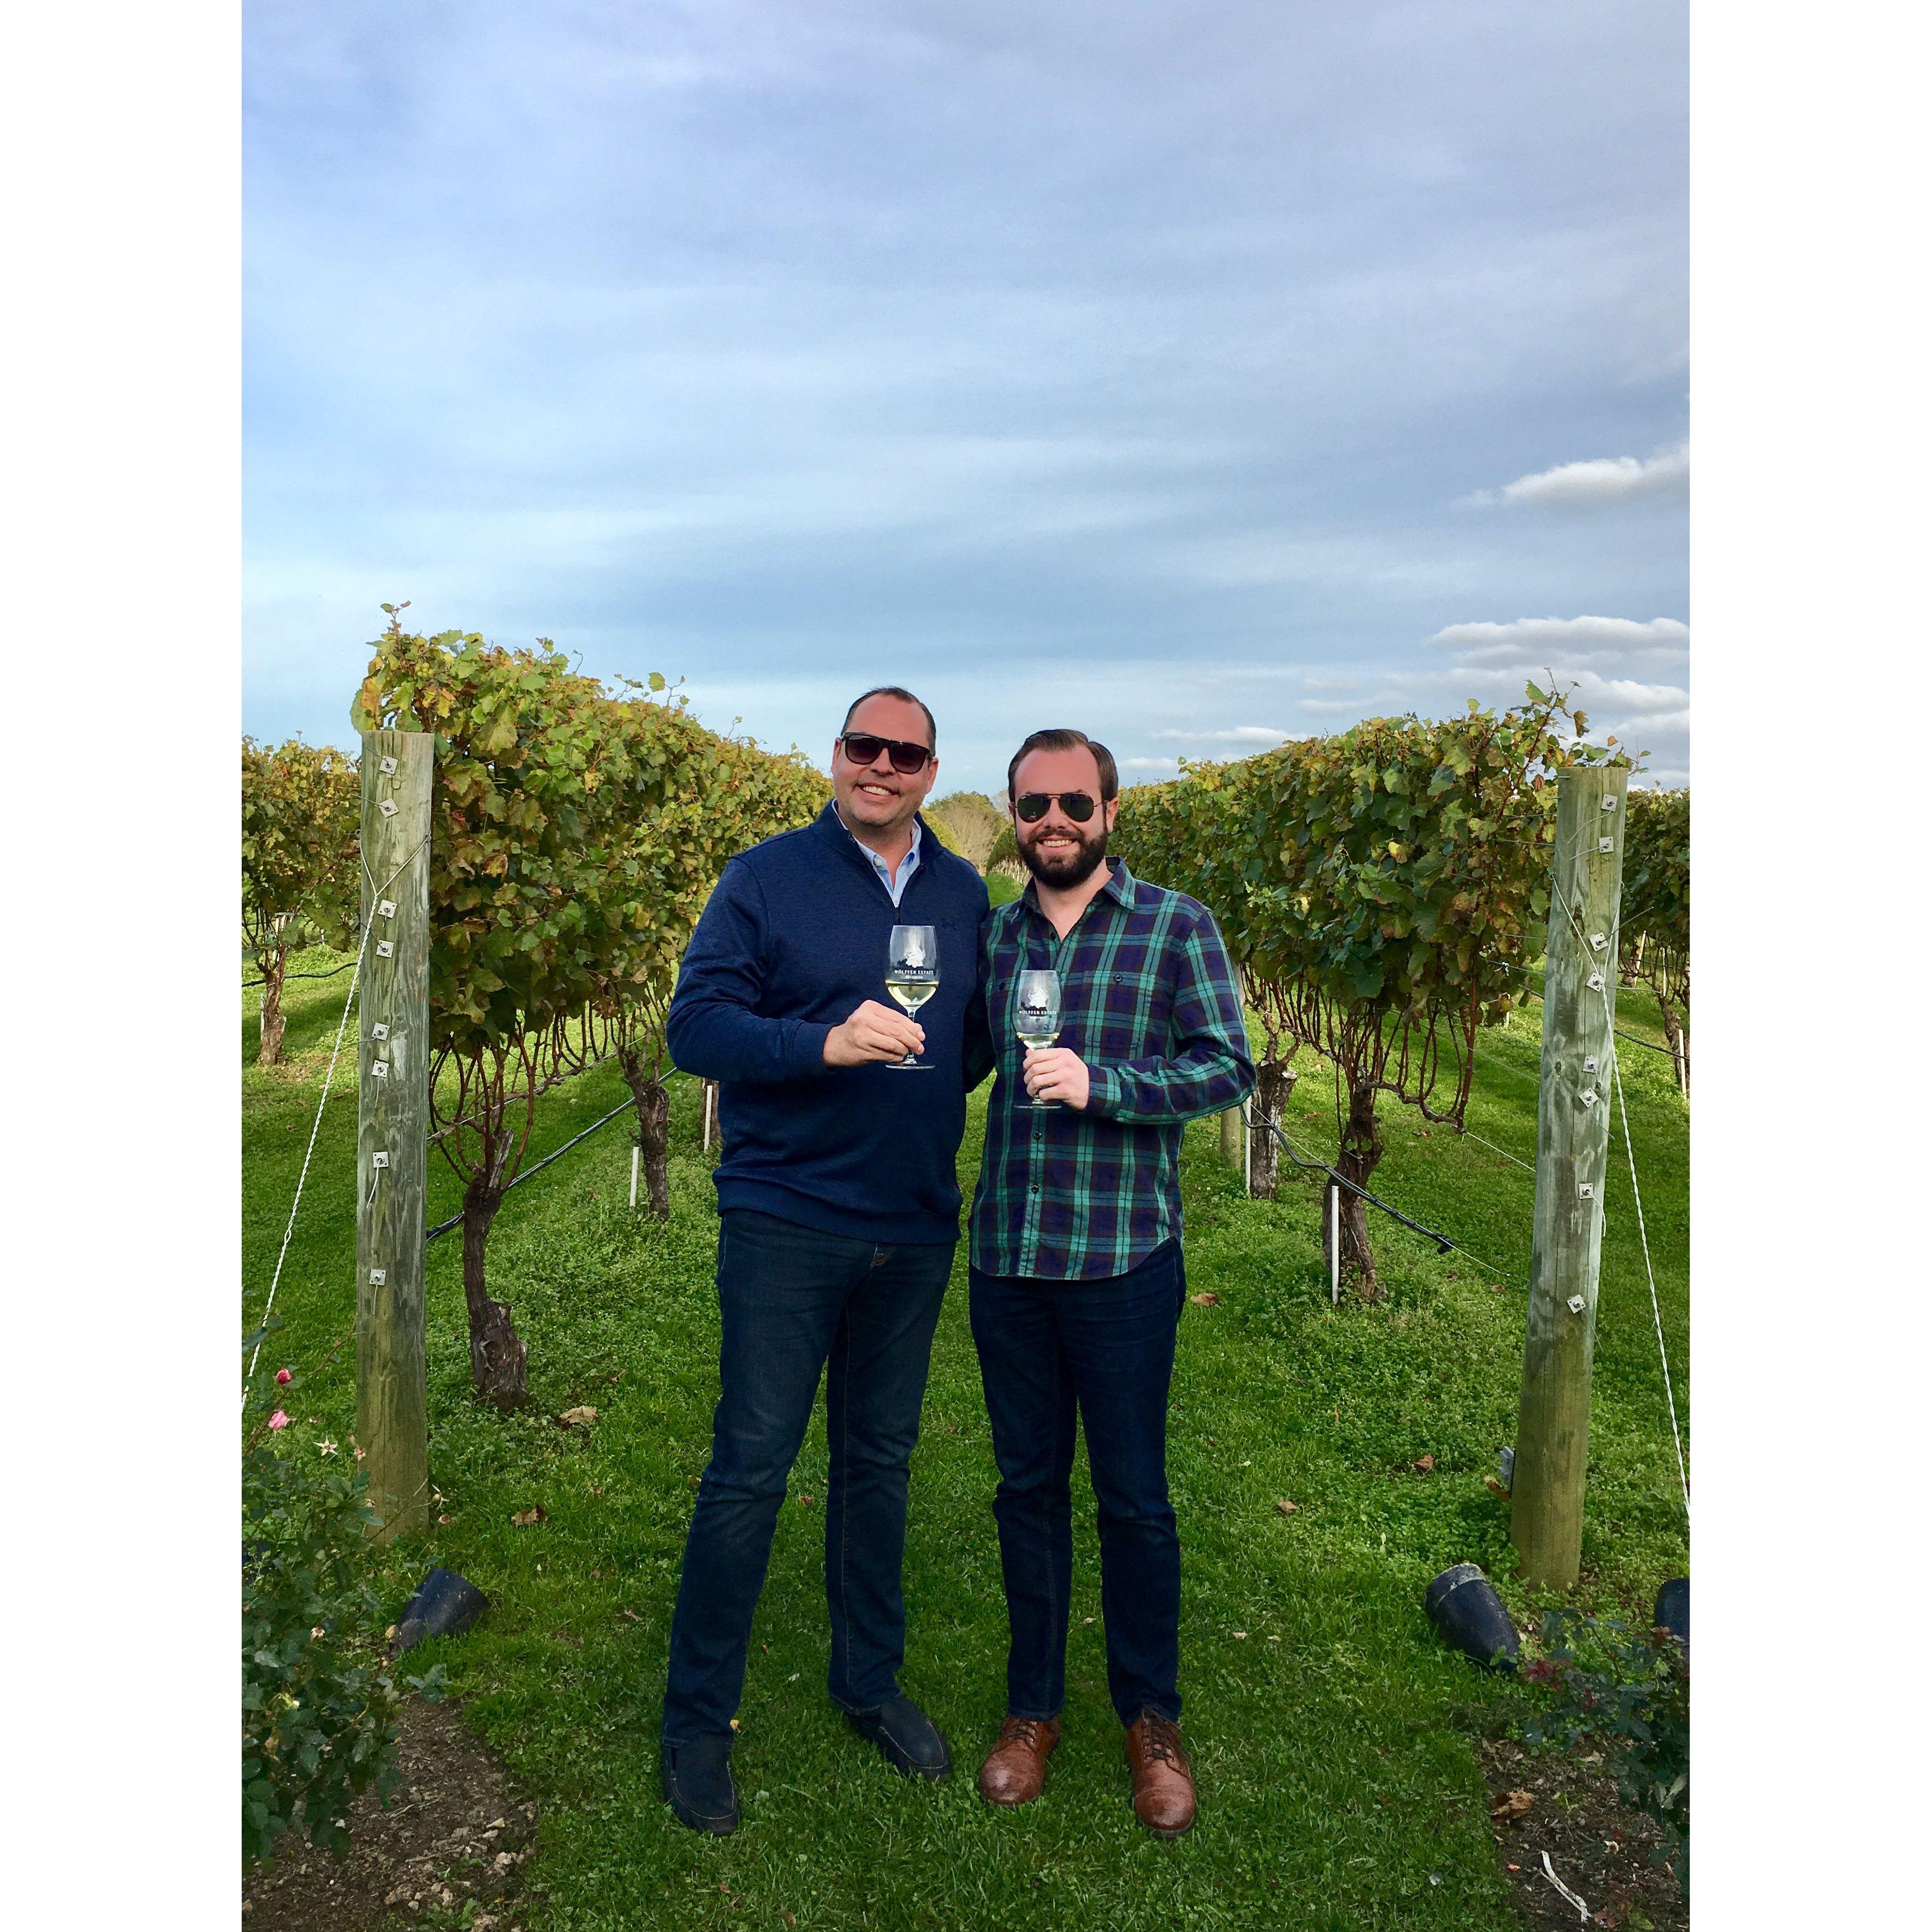 Our favorite winery in the Hamptons